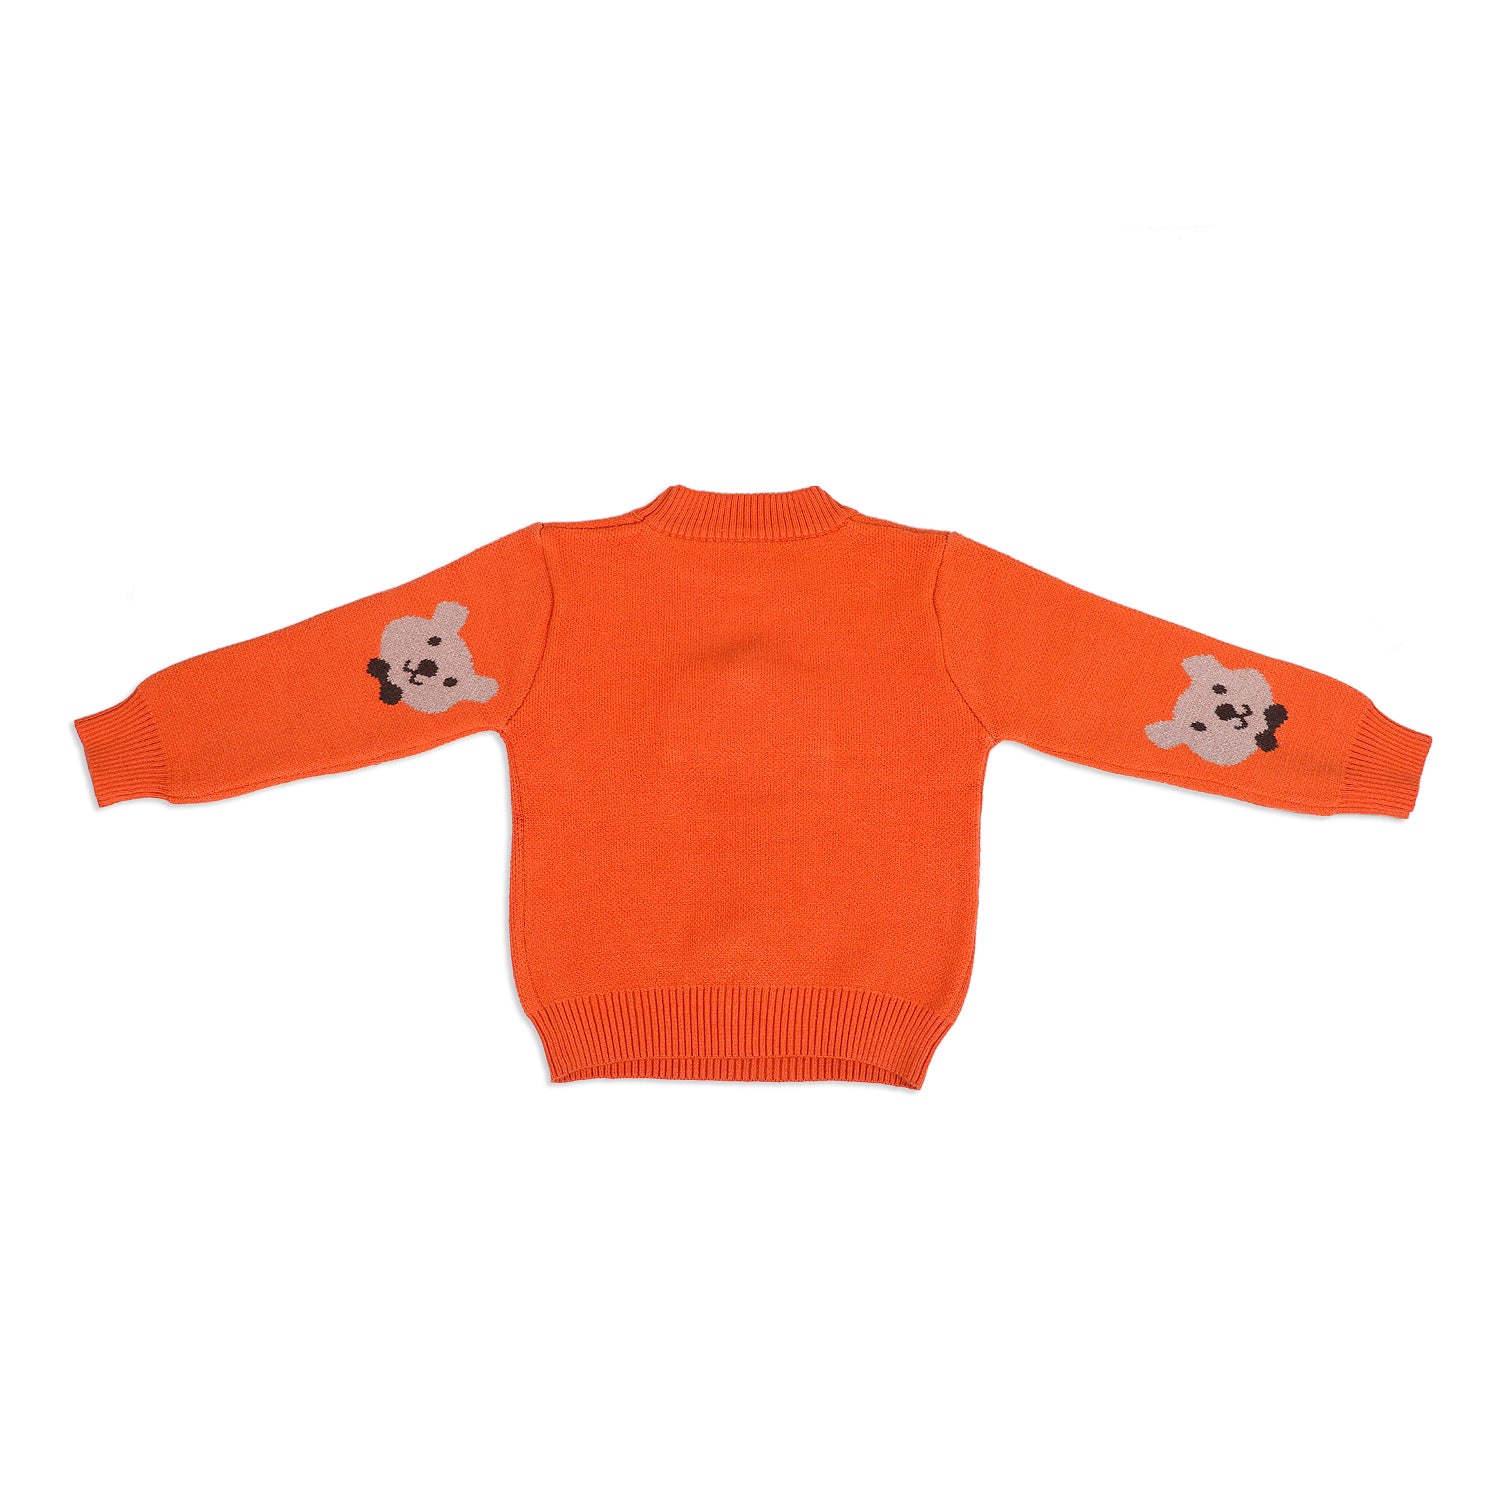 Mr. Bear Premium Full Sleeves Knitted Sweater With 3D Applique - Orange